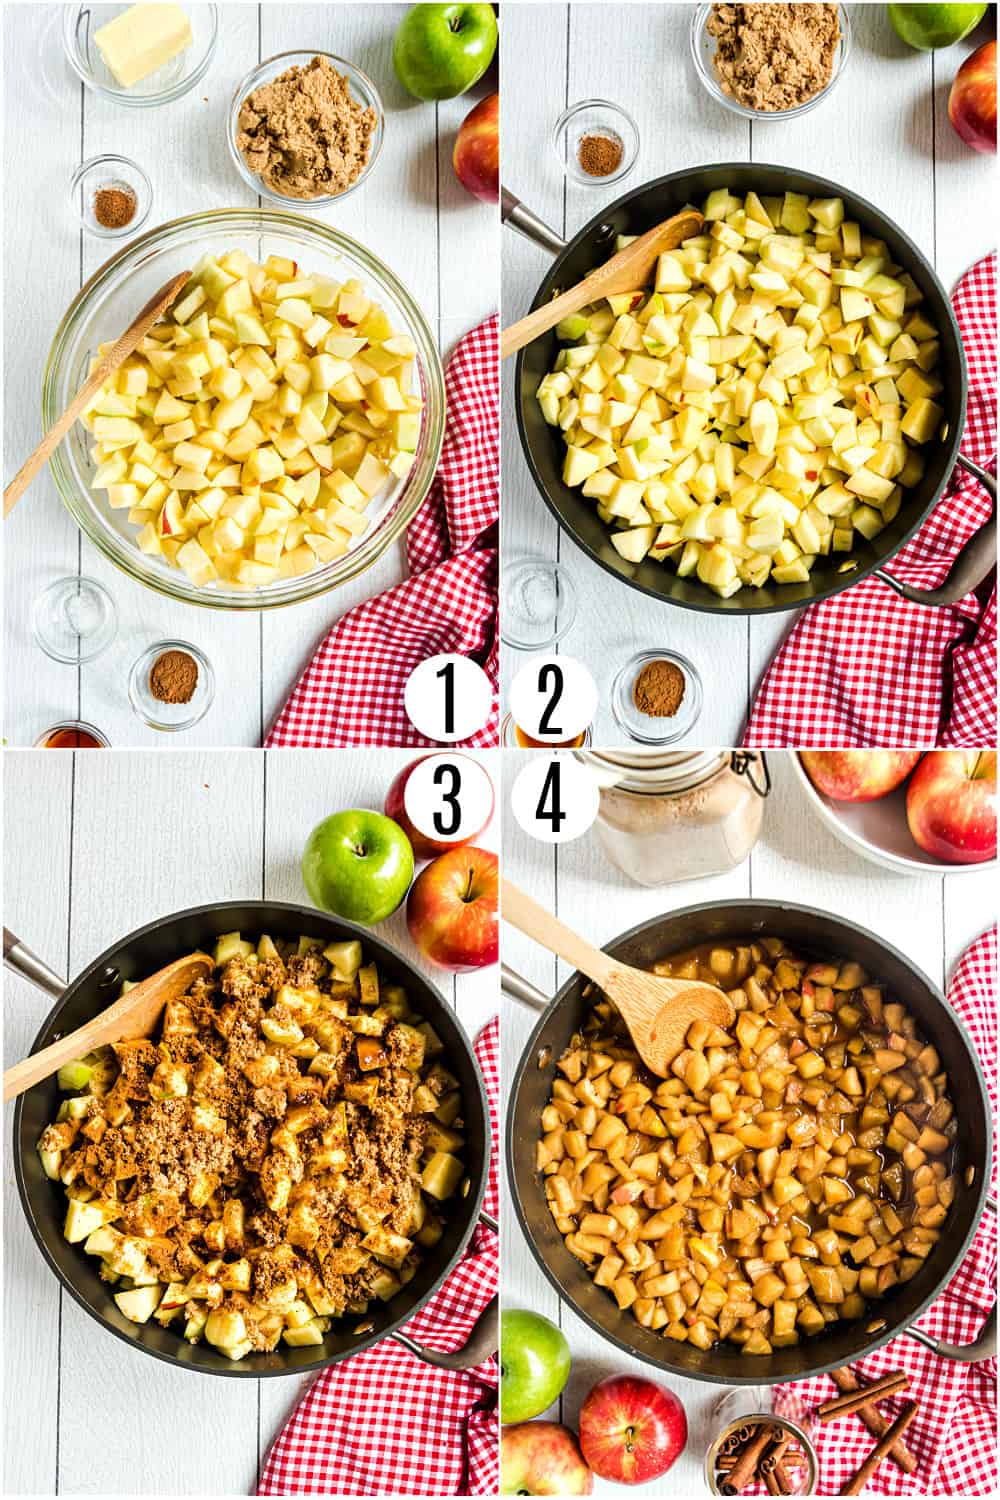 Step by step photo showing how to make skillet fried apples.